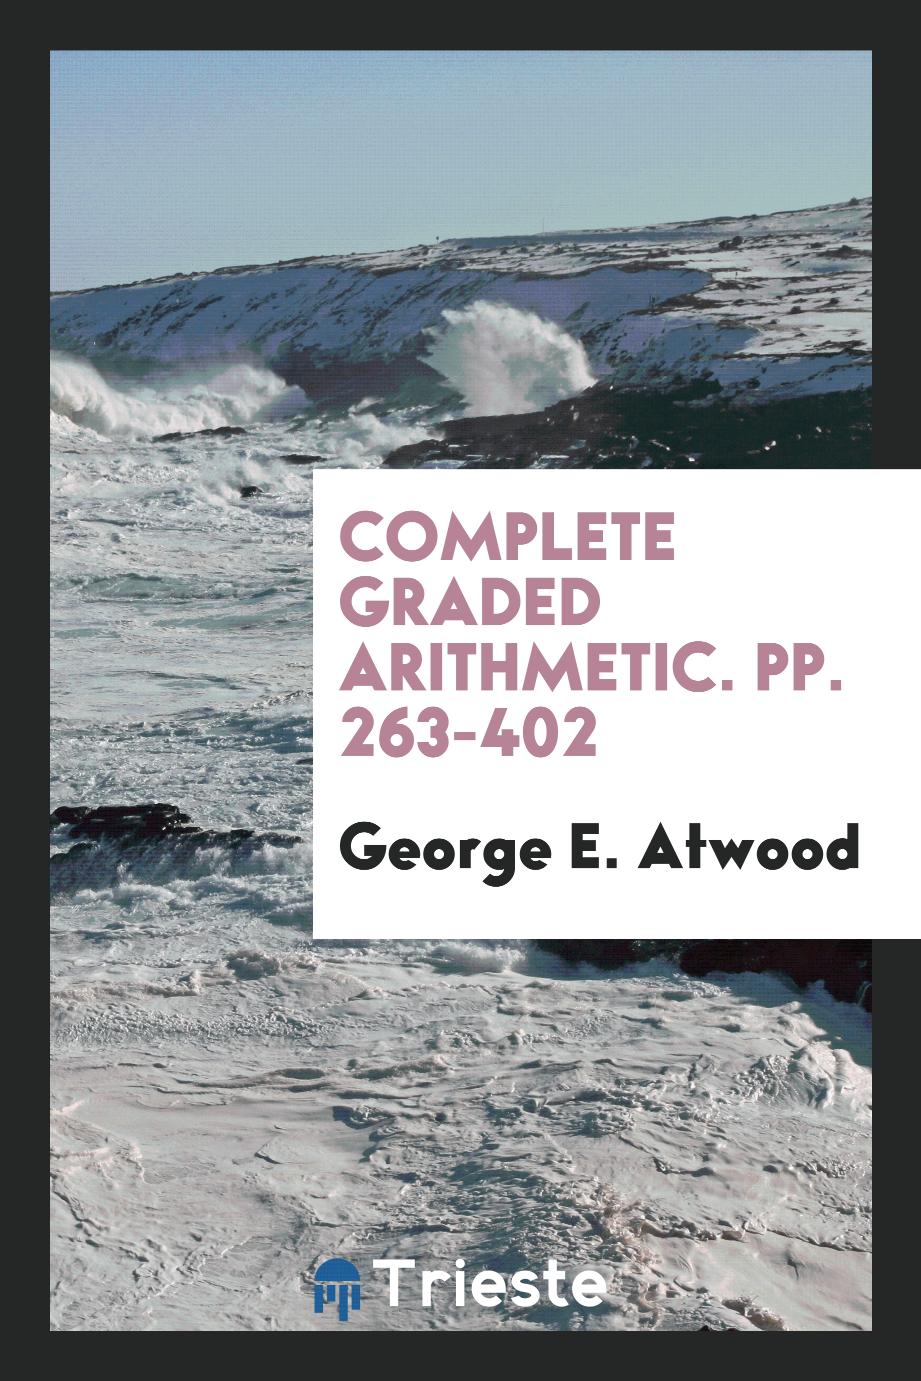 Complete Graded Arithmetic. pp. 263-402